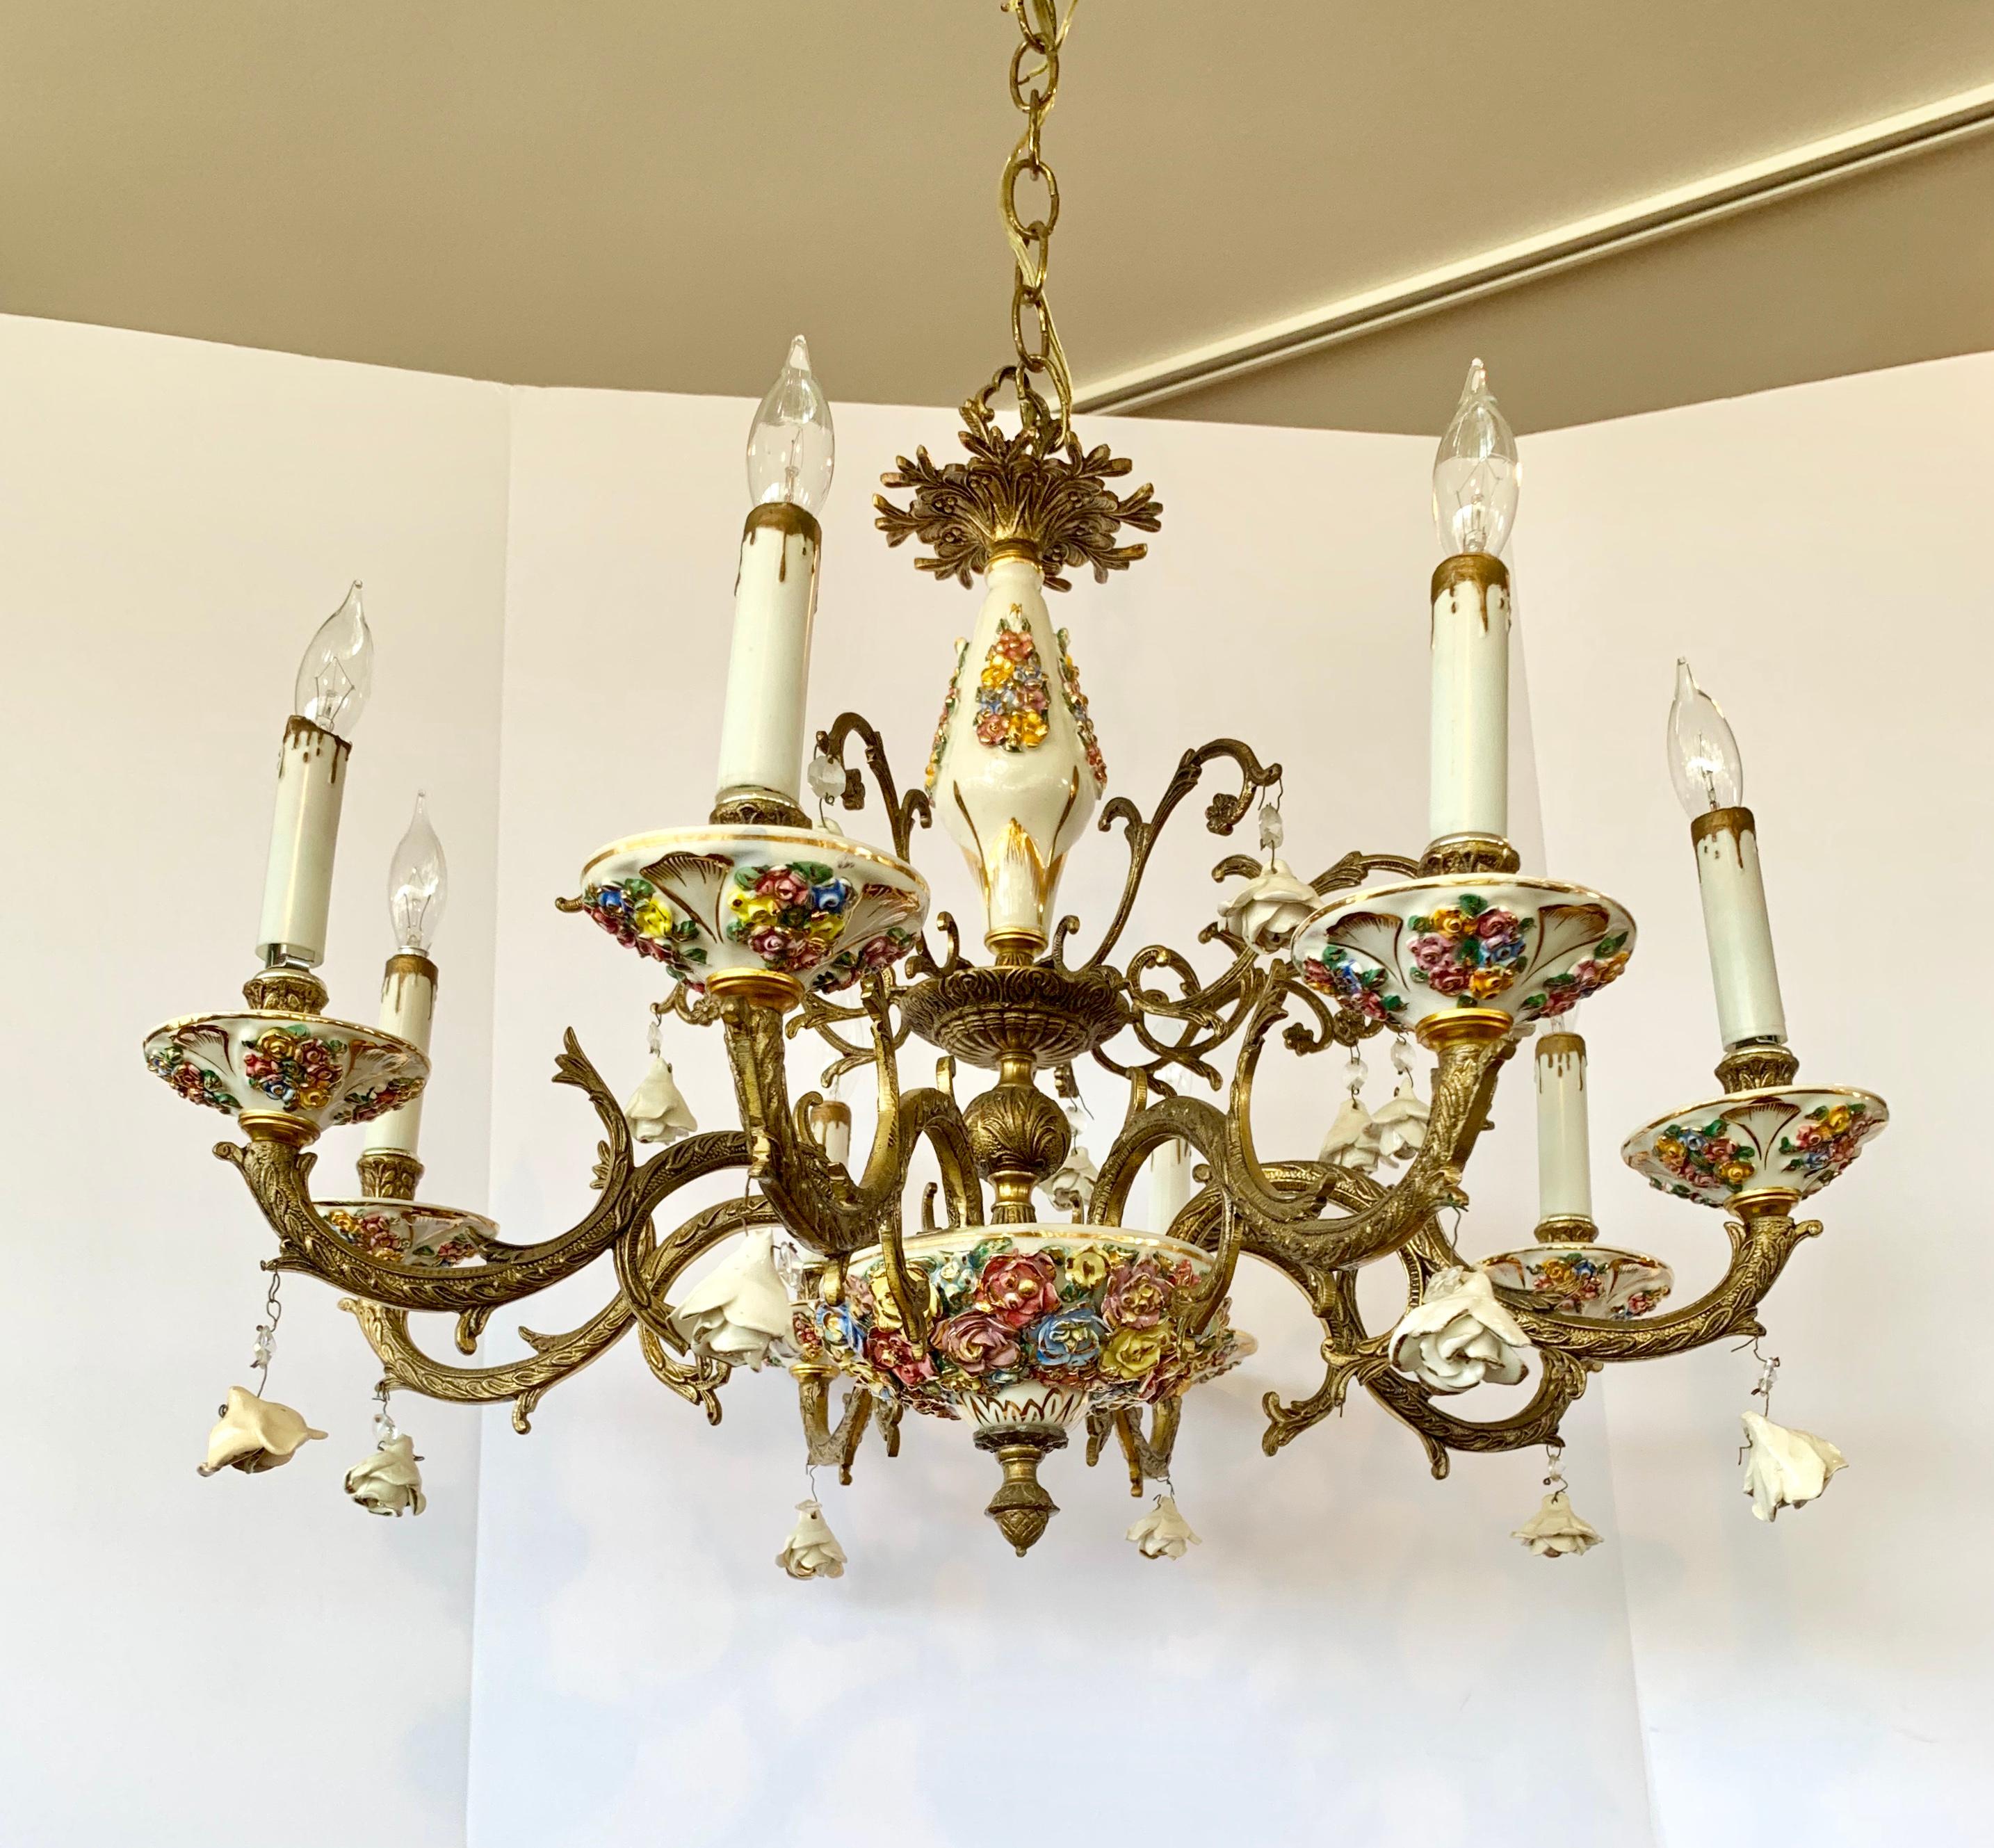 Elegant neoclassical antique Italian bronze and porcelain chandelier with raised petals in several different
colors give this item a one of a kind look. Wired for USA and has eight arms and eight respective bulbs.